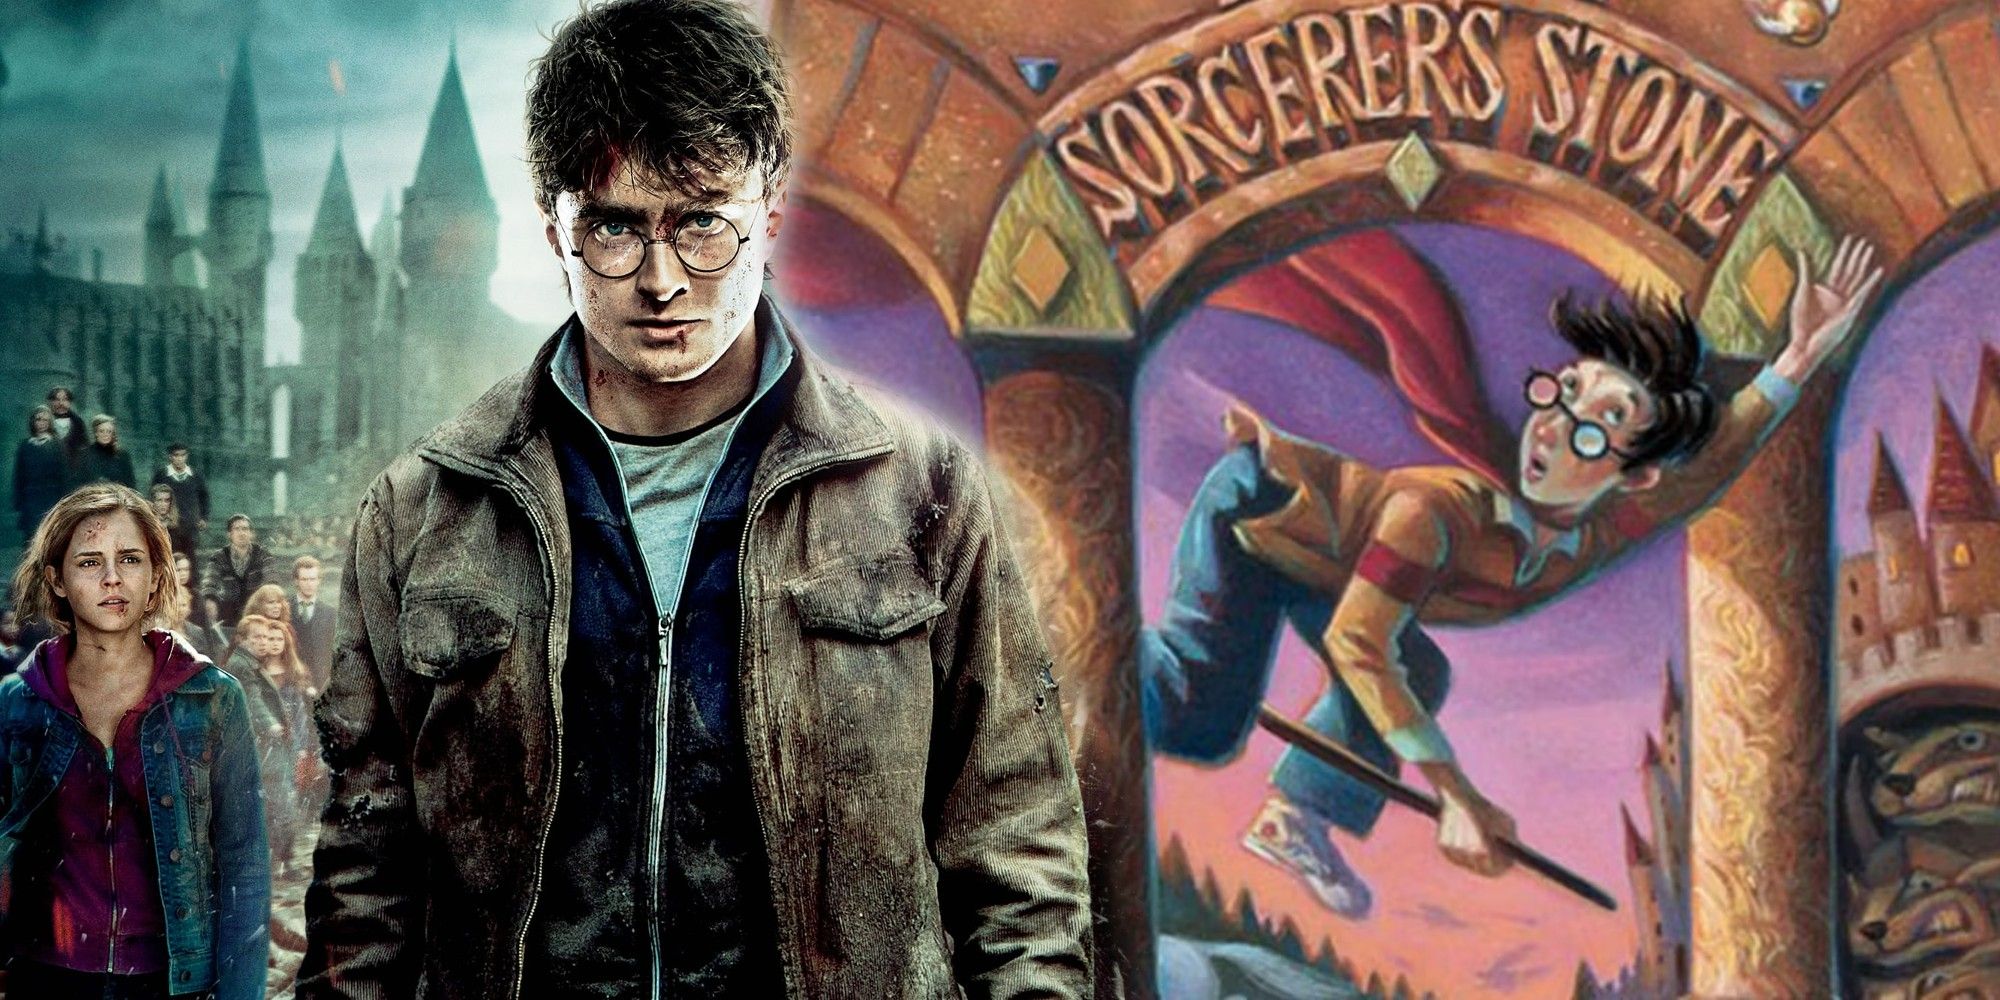 An image of Daniel Radcliffe as Harry Potter overlaying a shot of Hogwarts and the cover of Harry Potter and the Sorcerer's Stone